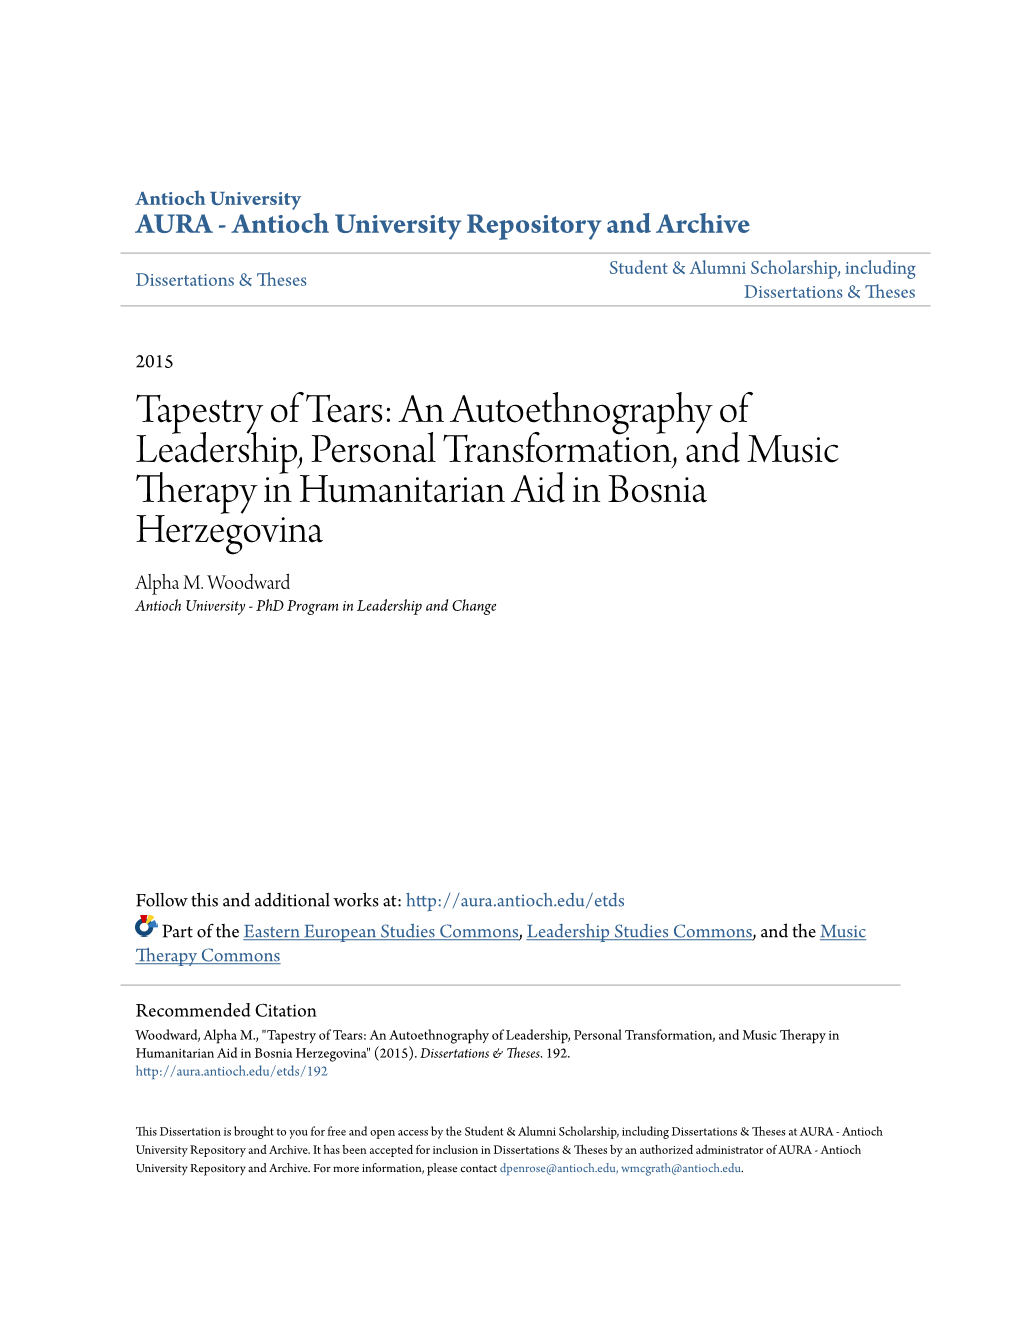 An Autoethnography of Leadership, Personal Transformation, and Music Therapy in Humanitarian Aid in Bosnia Herzegovina Alpha M